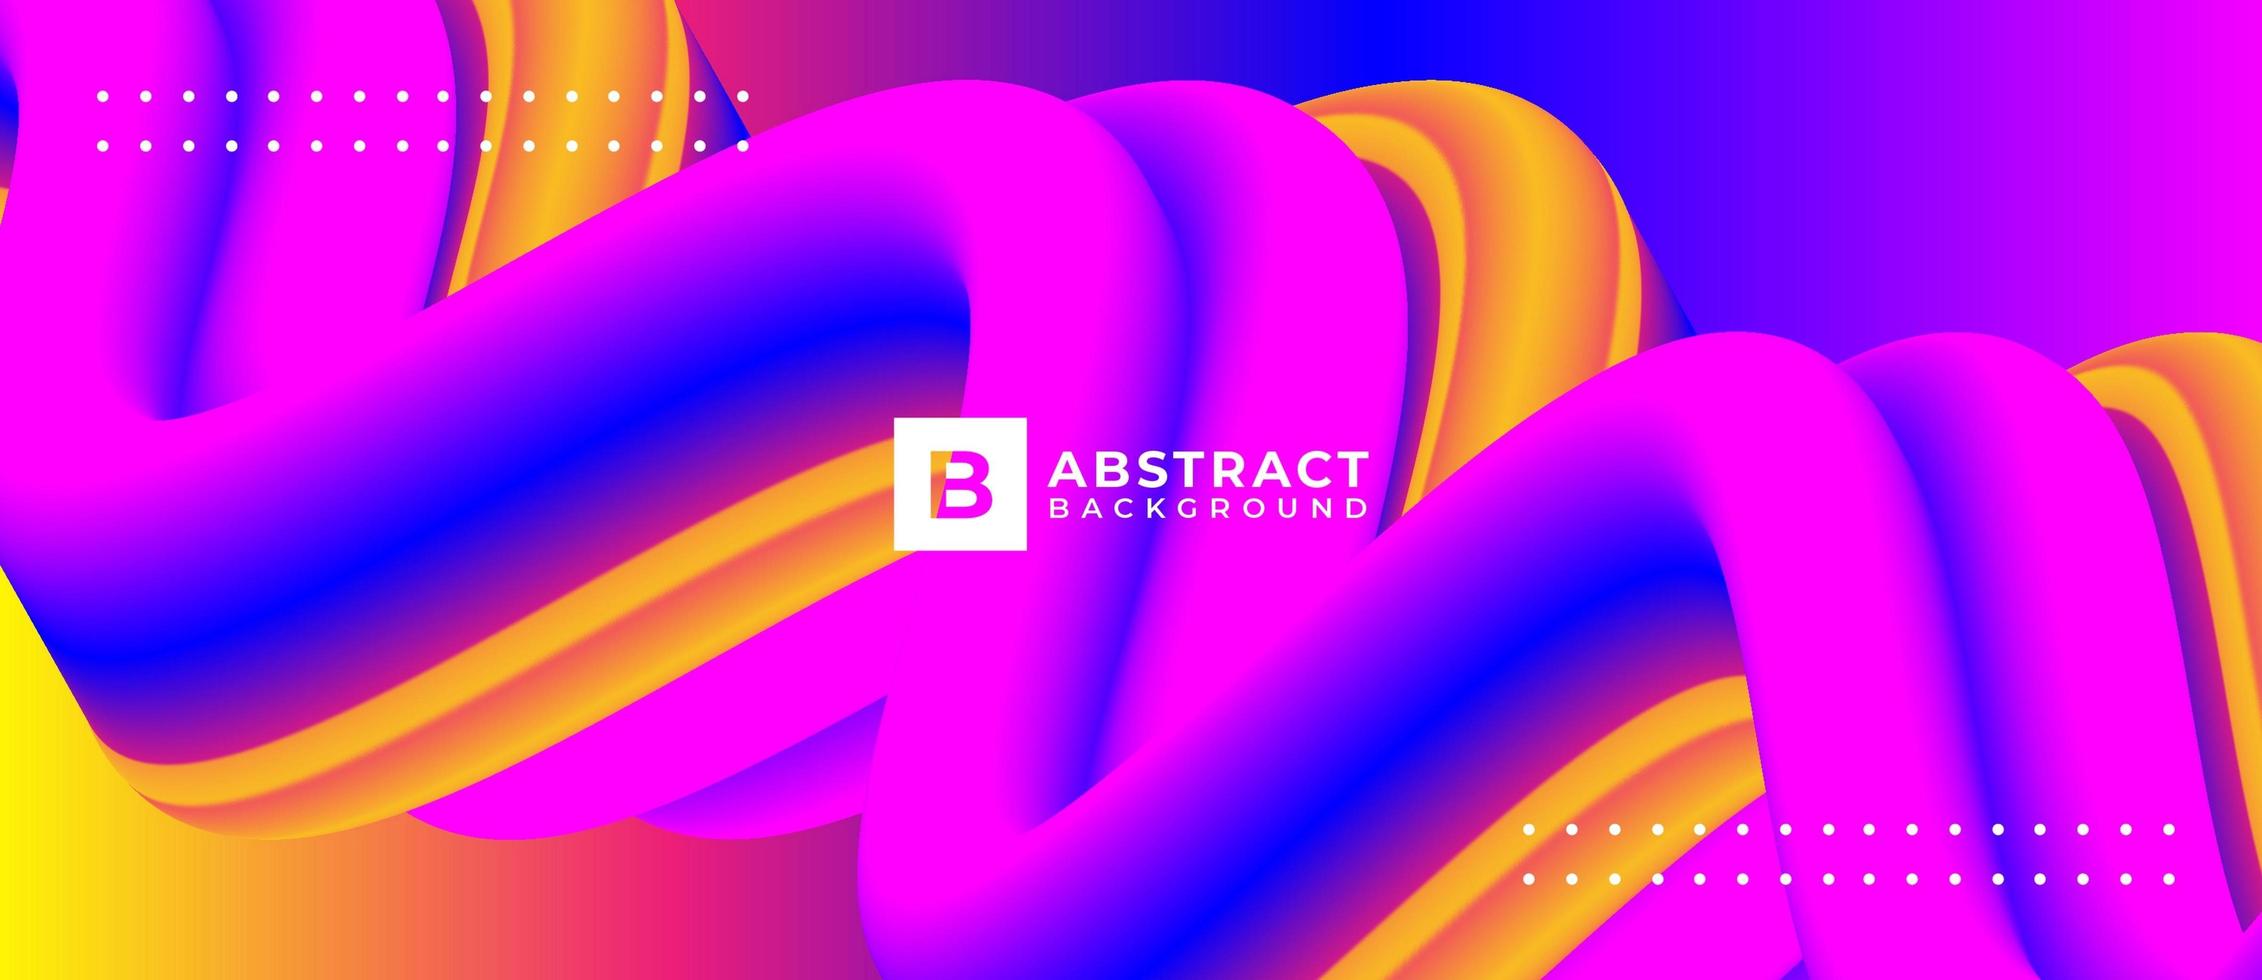 Neon Pink 3D Tube Shapes Wave Abstract Background vector